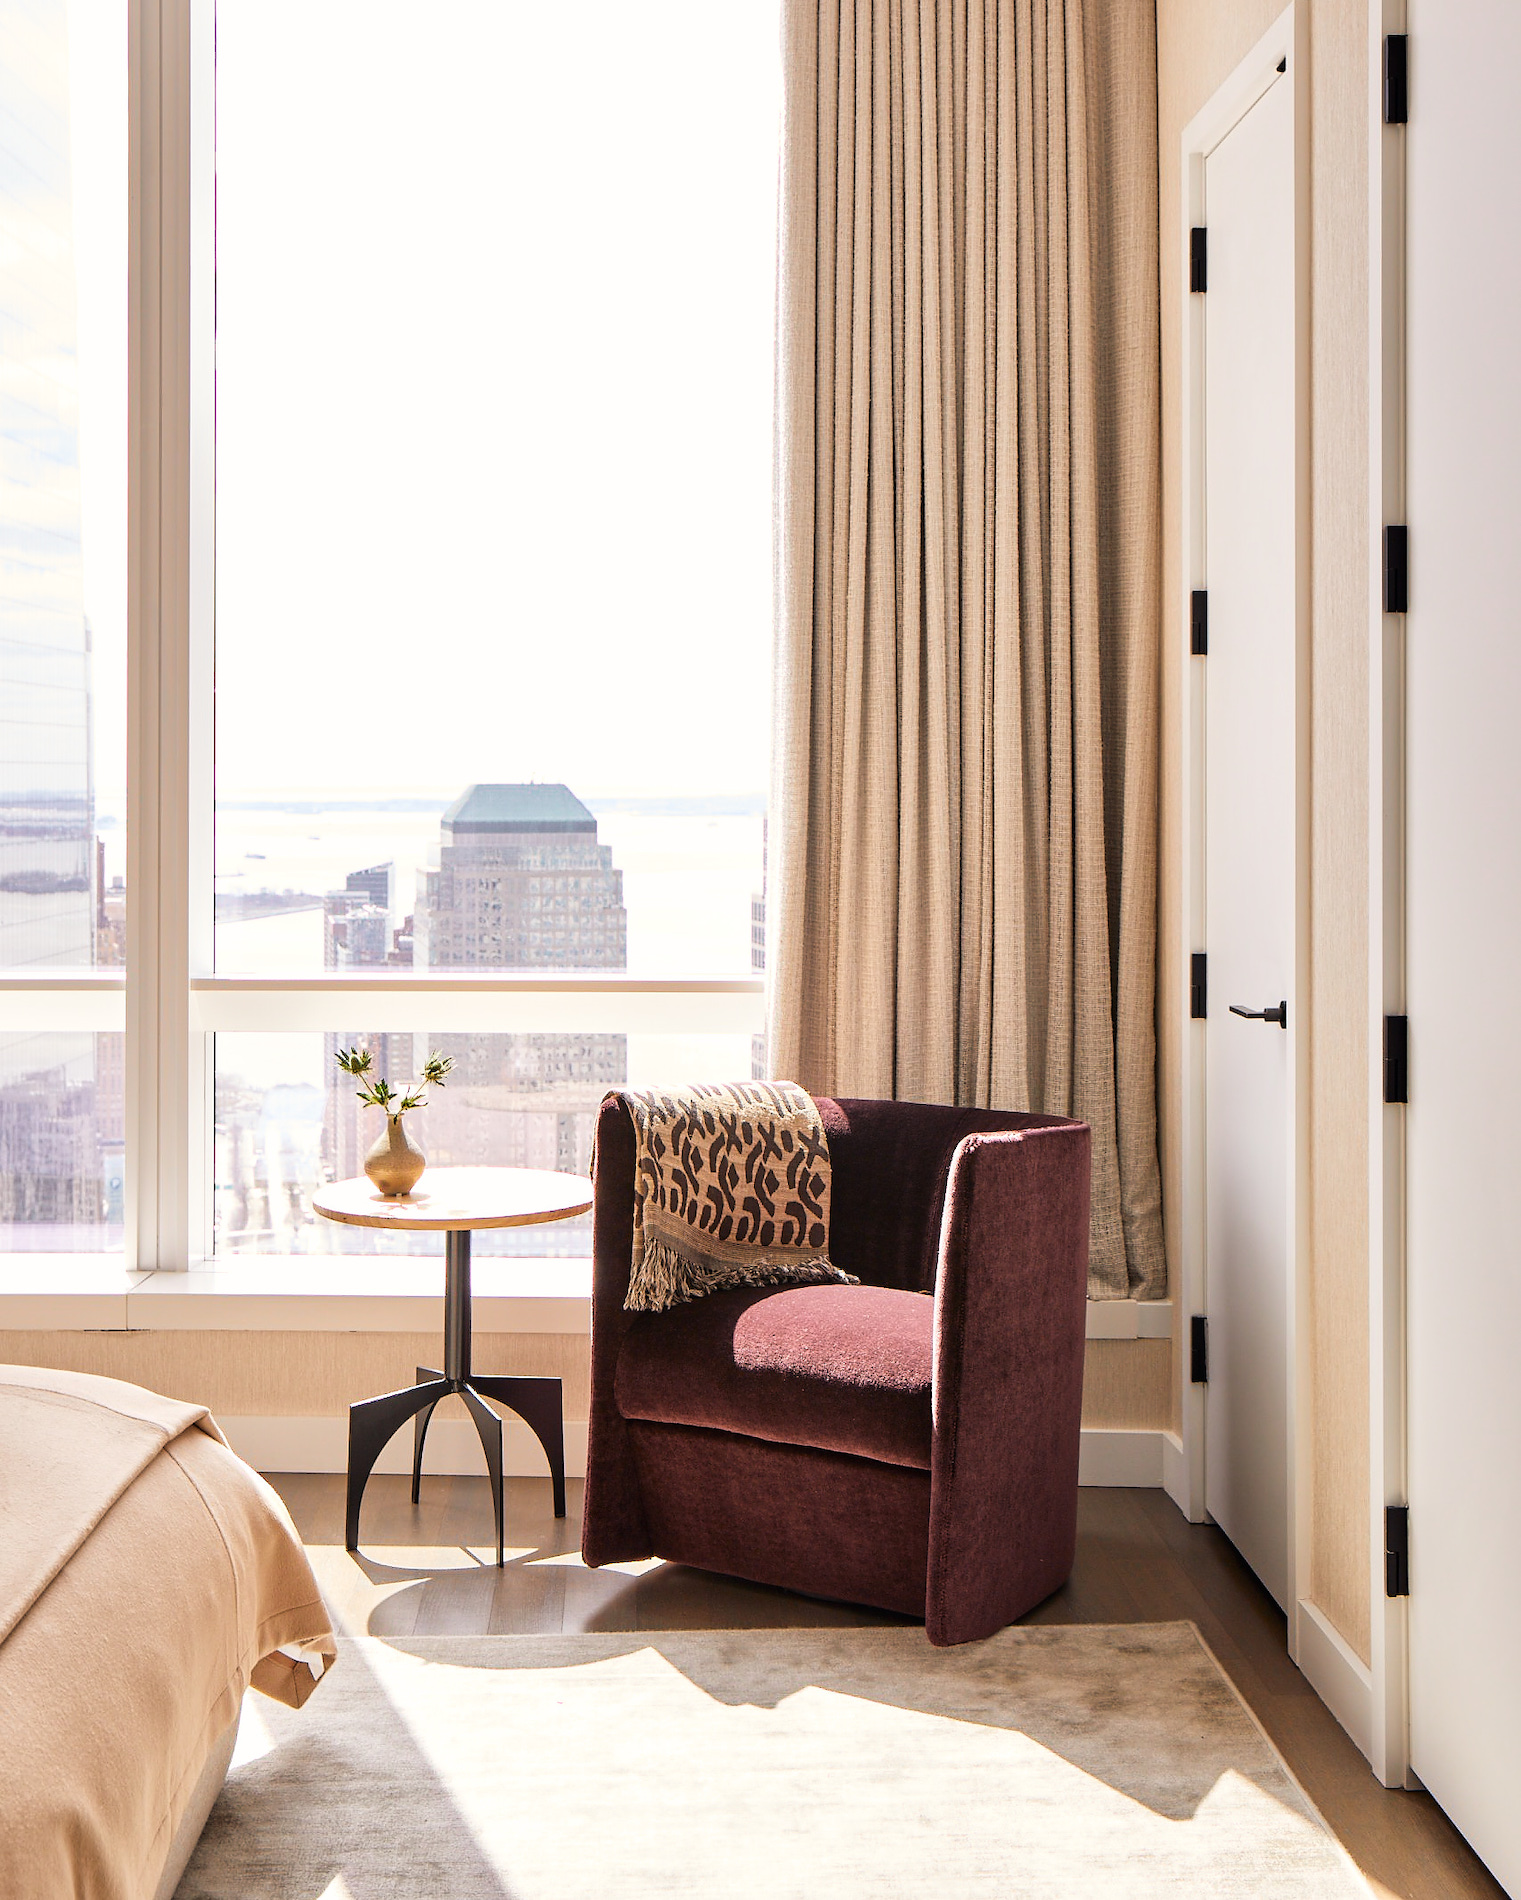 Bedroom view in a Tribeca penthouse in New York interior designed by Jessica Gersten in Effect Magazine